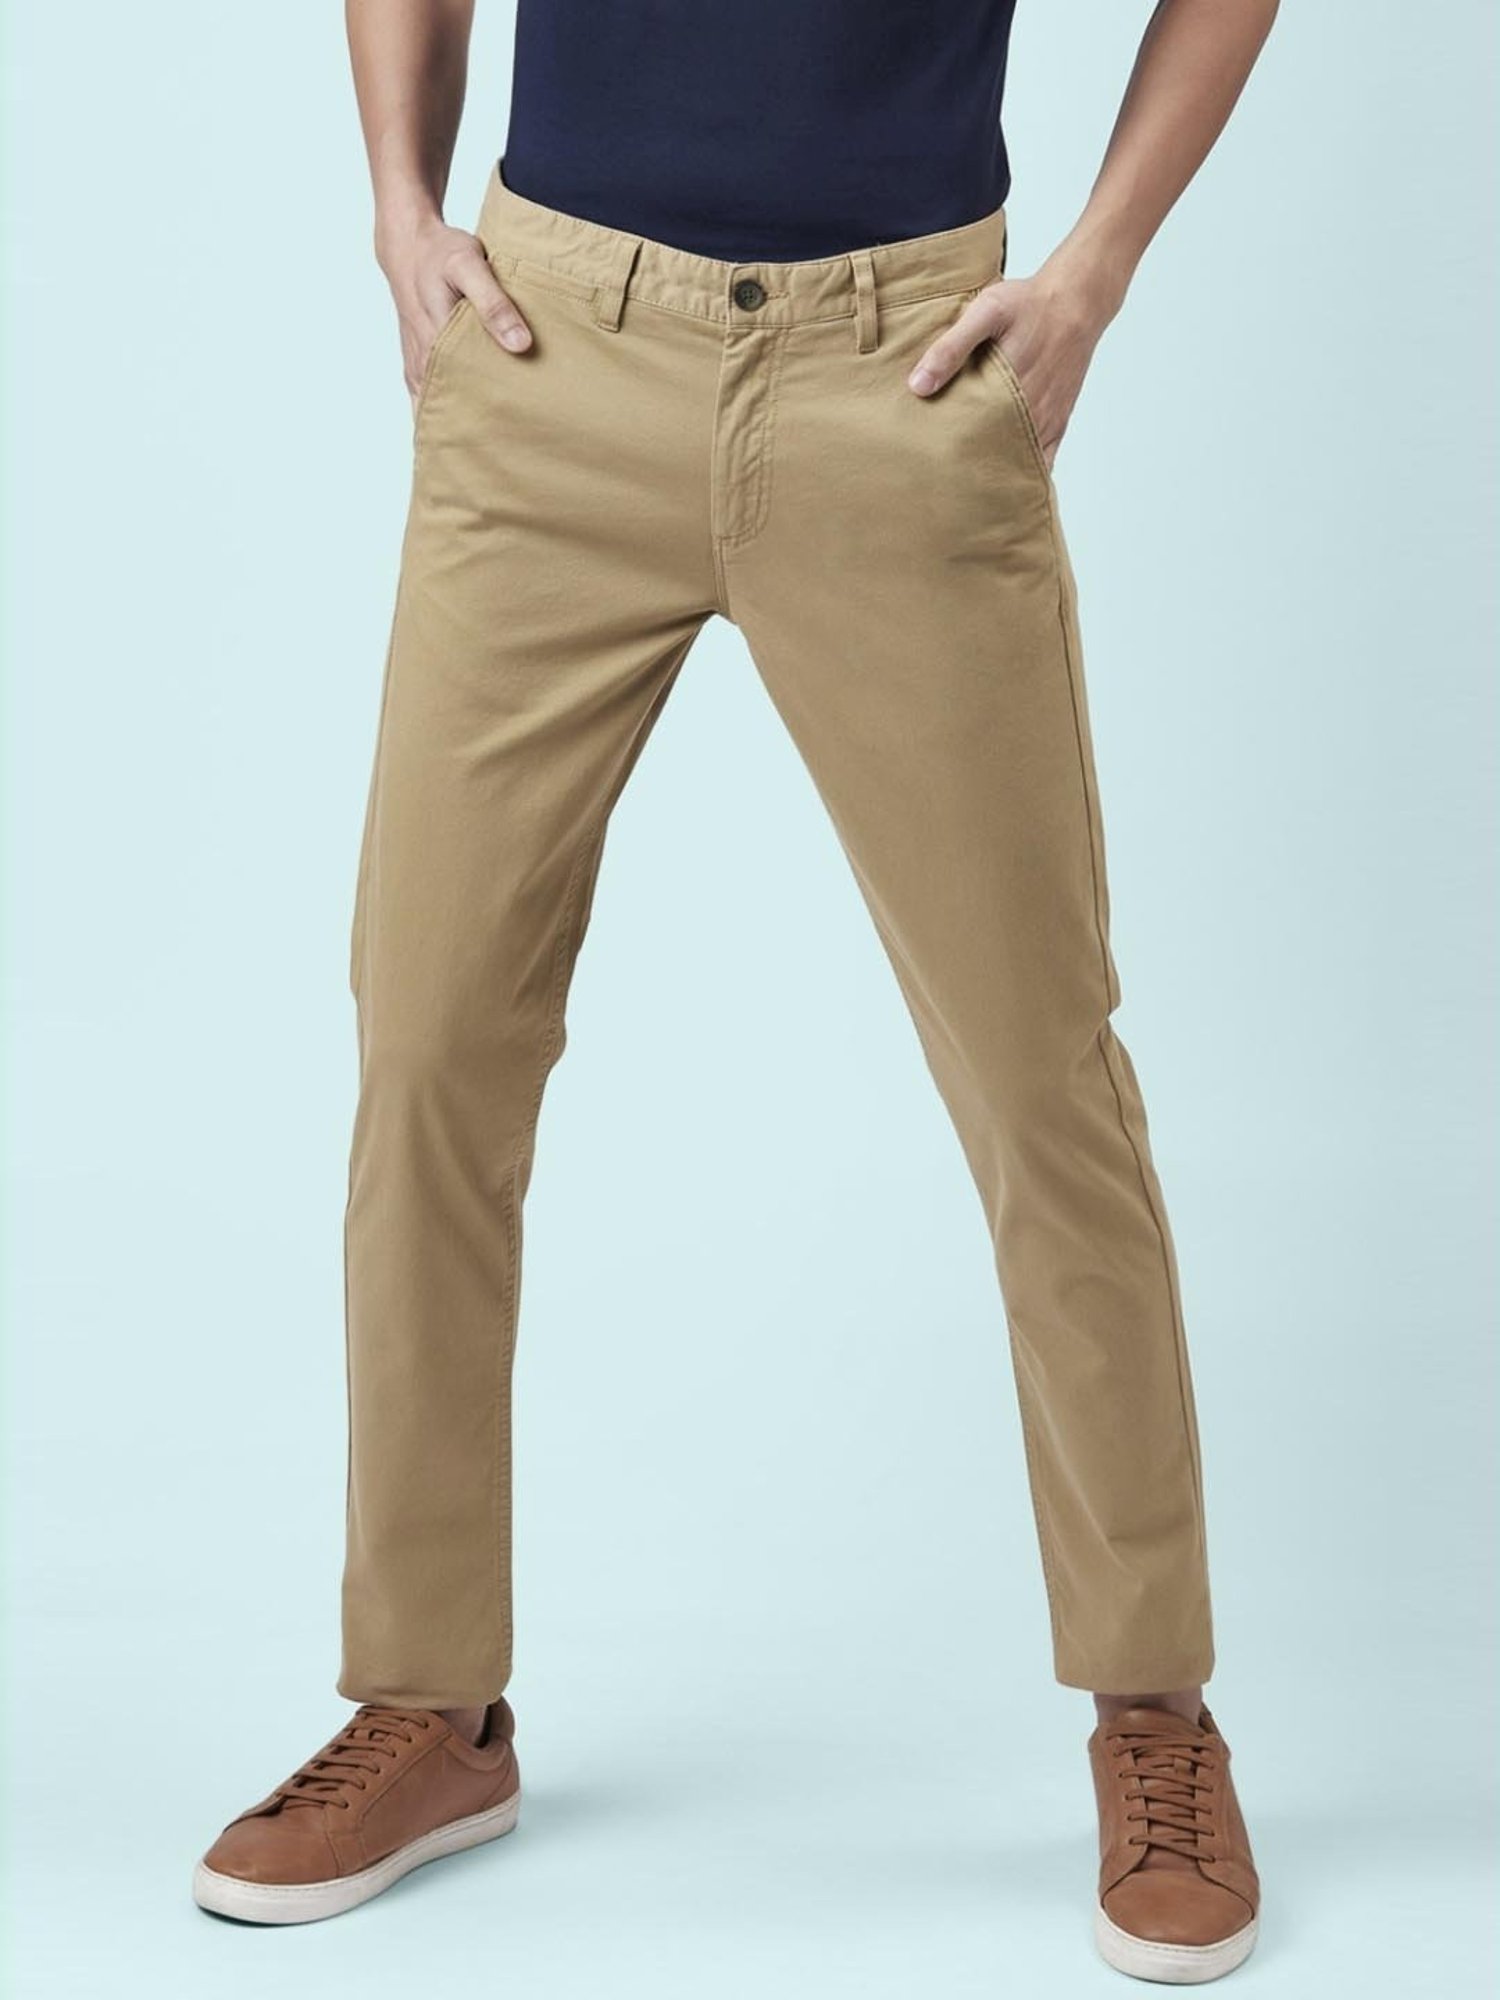 Buy TOBACCO Trousers & Pants for Men by Byford by Pantaloons Online |  Ajio.com